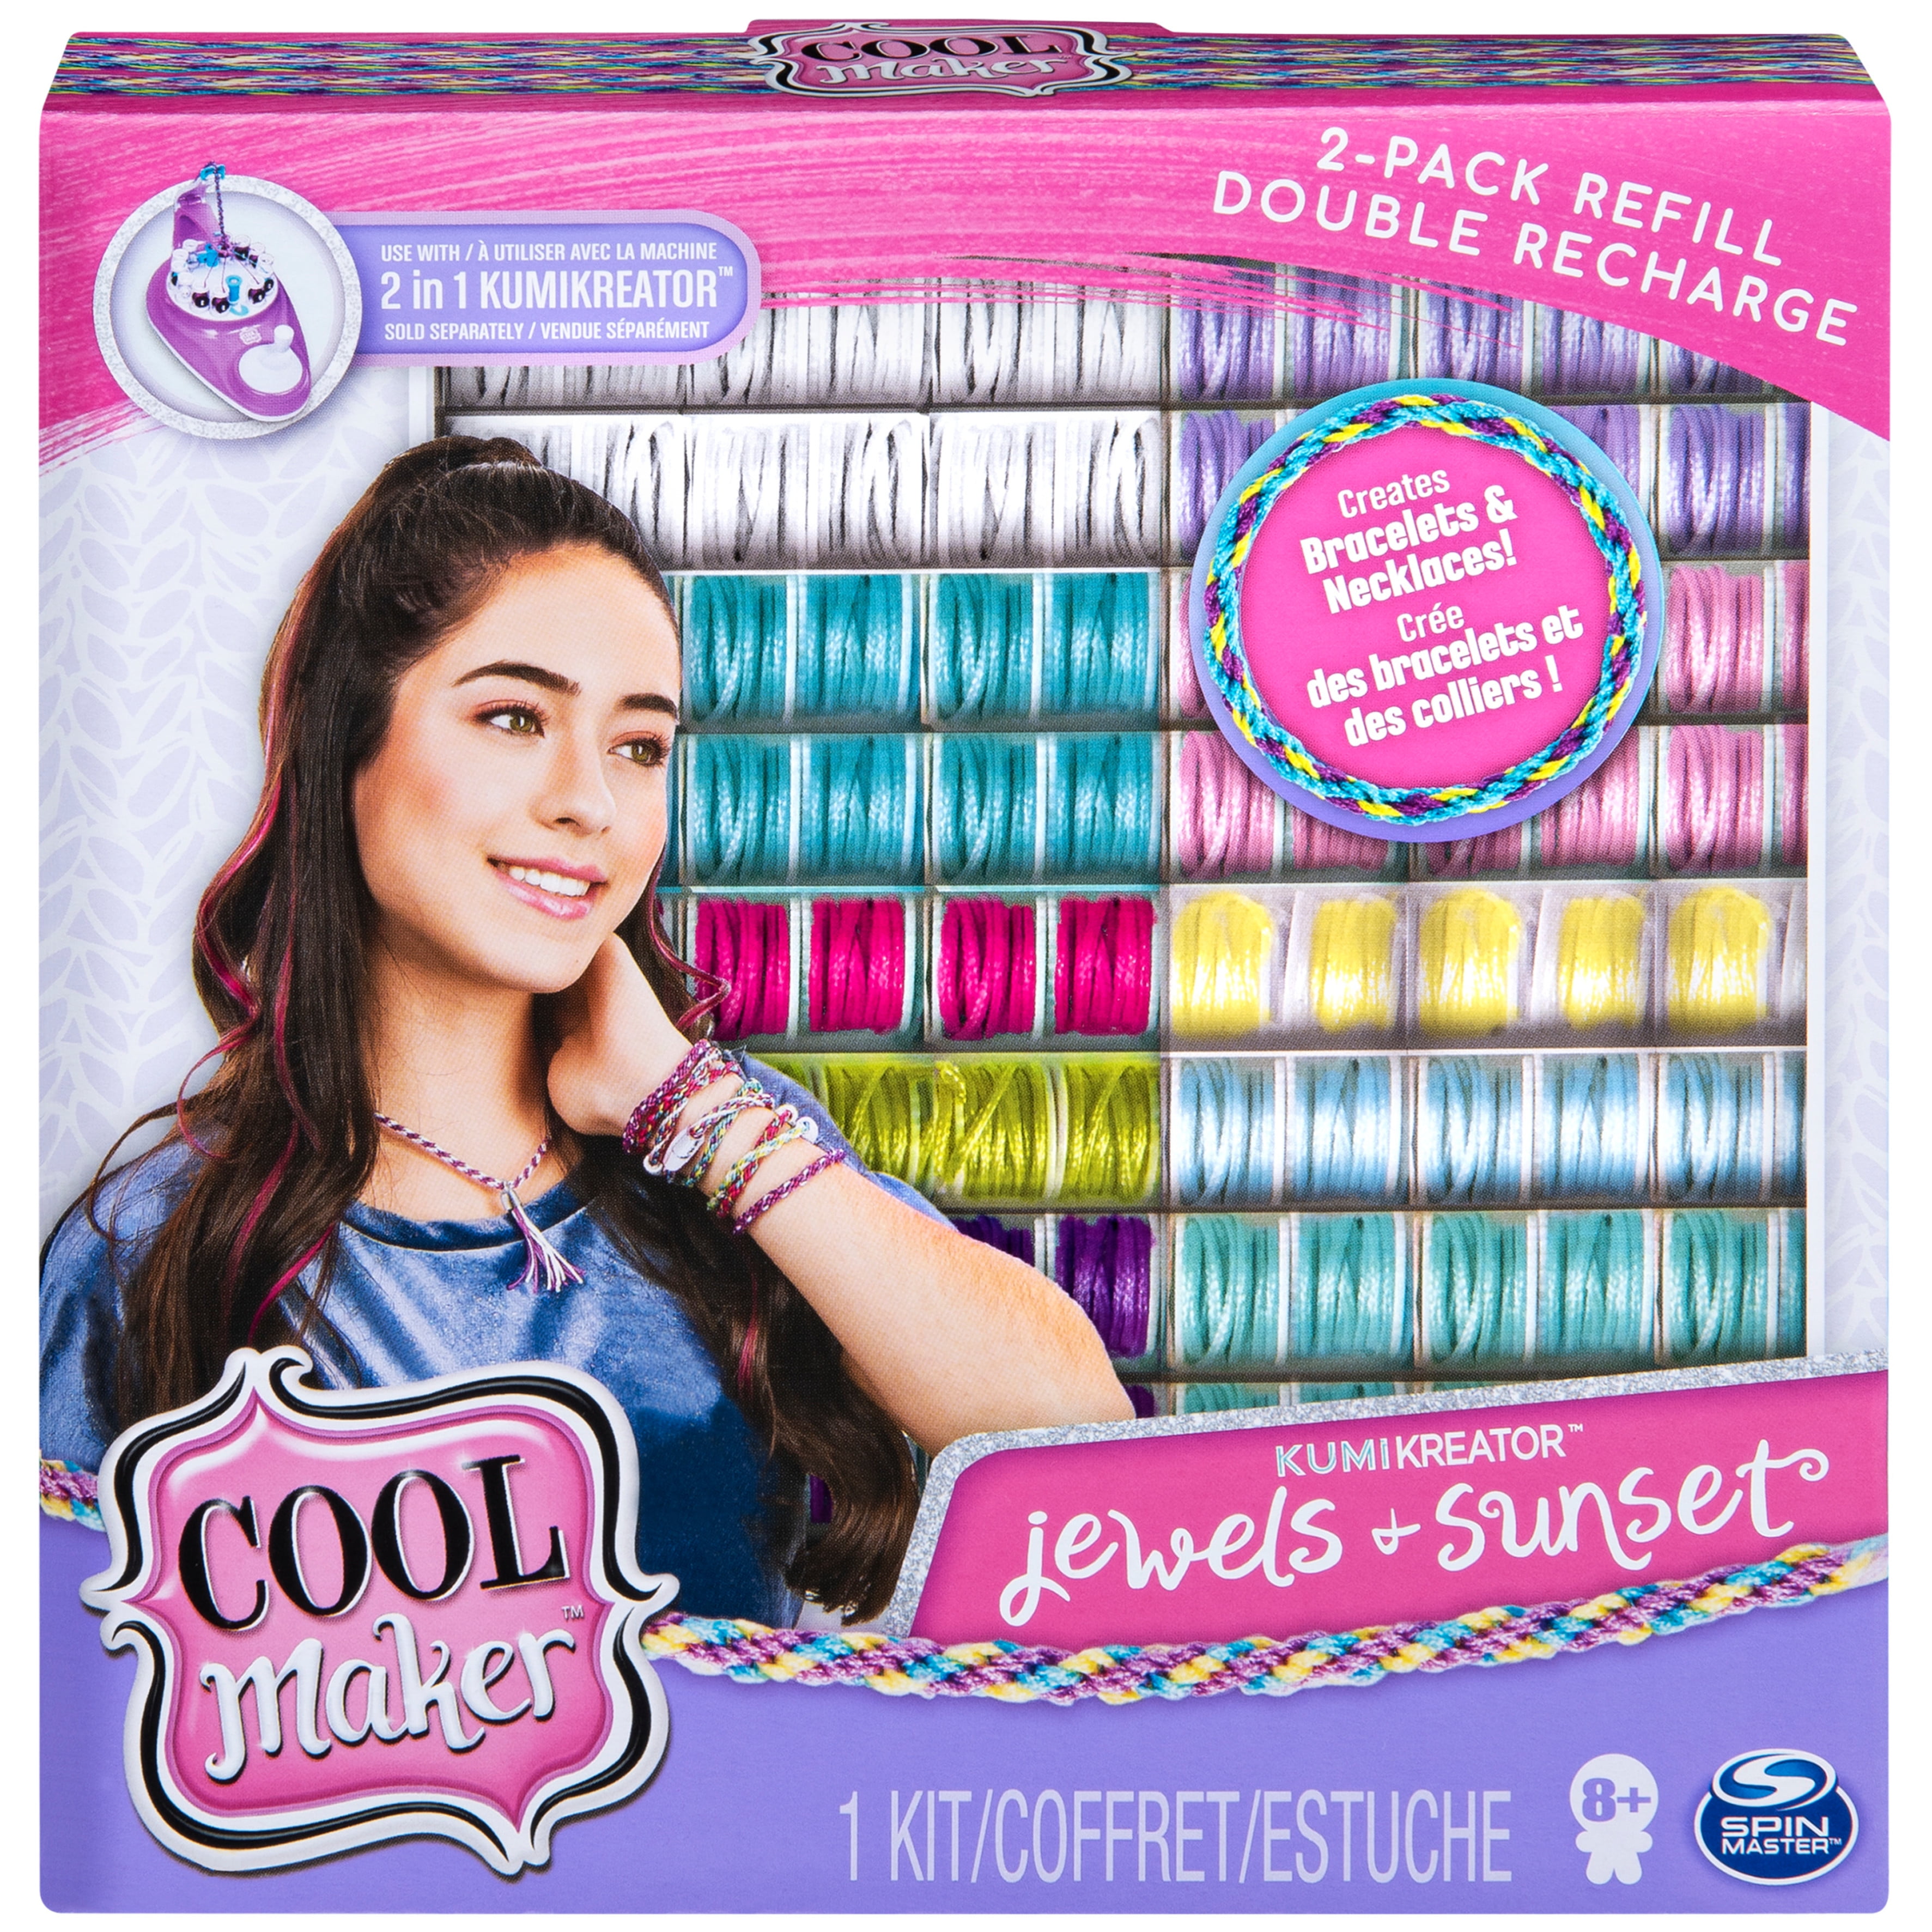 Buy Cool Maker, KumiKreator Mermaid Fashion Pack Refill, Friendship  Bracelet and Necklace Activity Kit Online at Lowest Price Ever in India